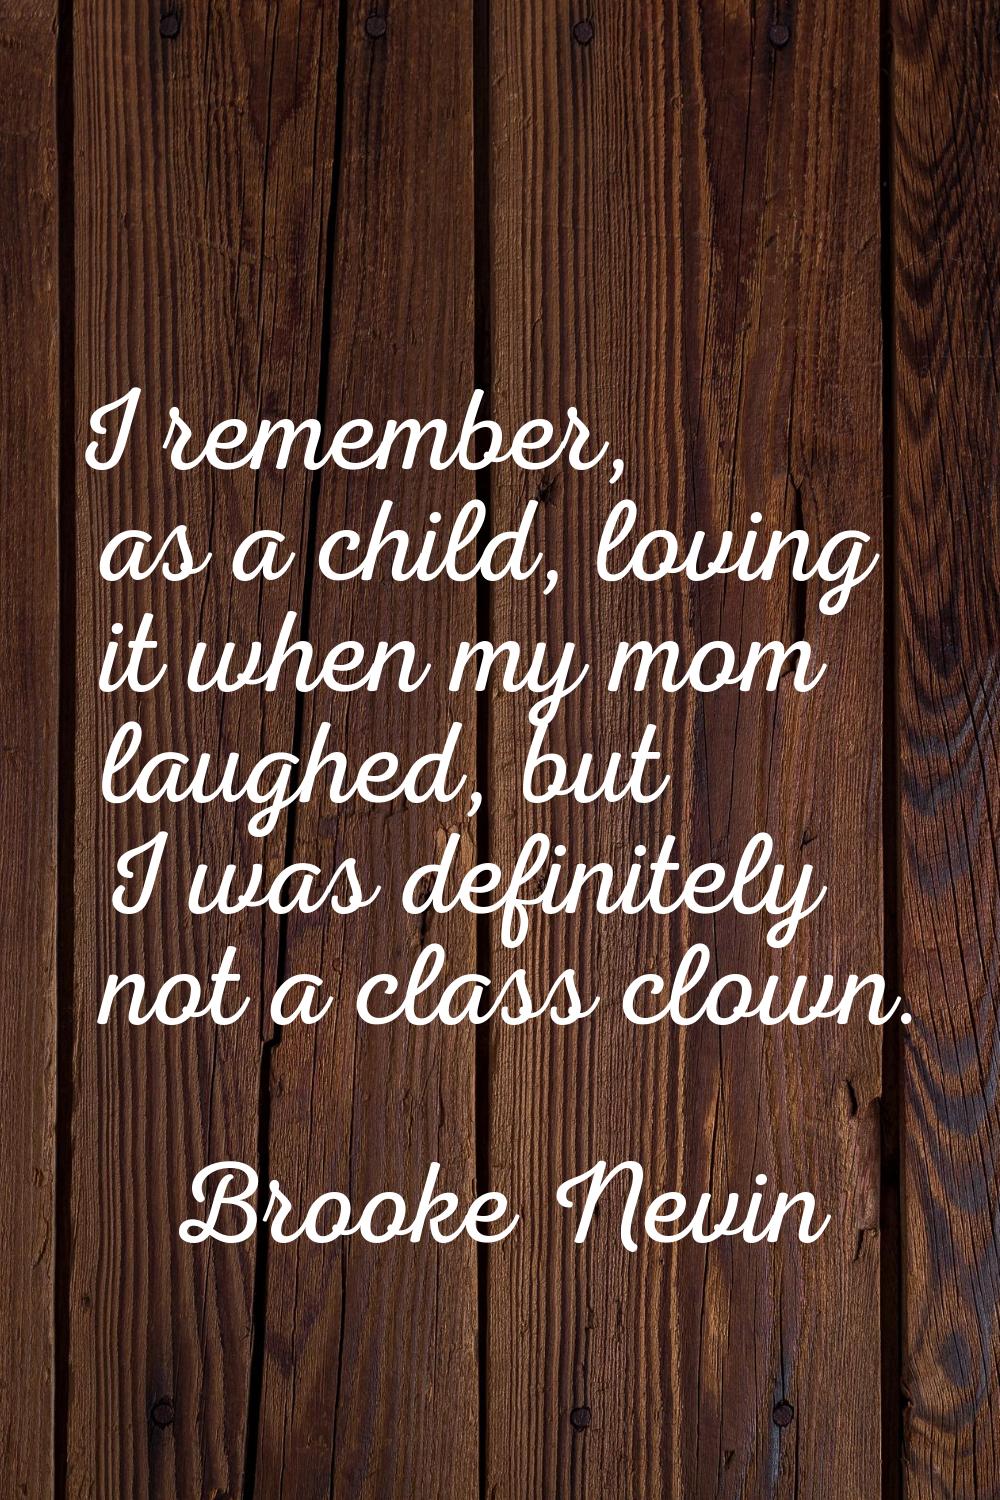 I remember, as a child, loving it when my mom laughed, but I was definitely not a class clown.